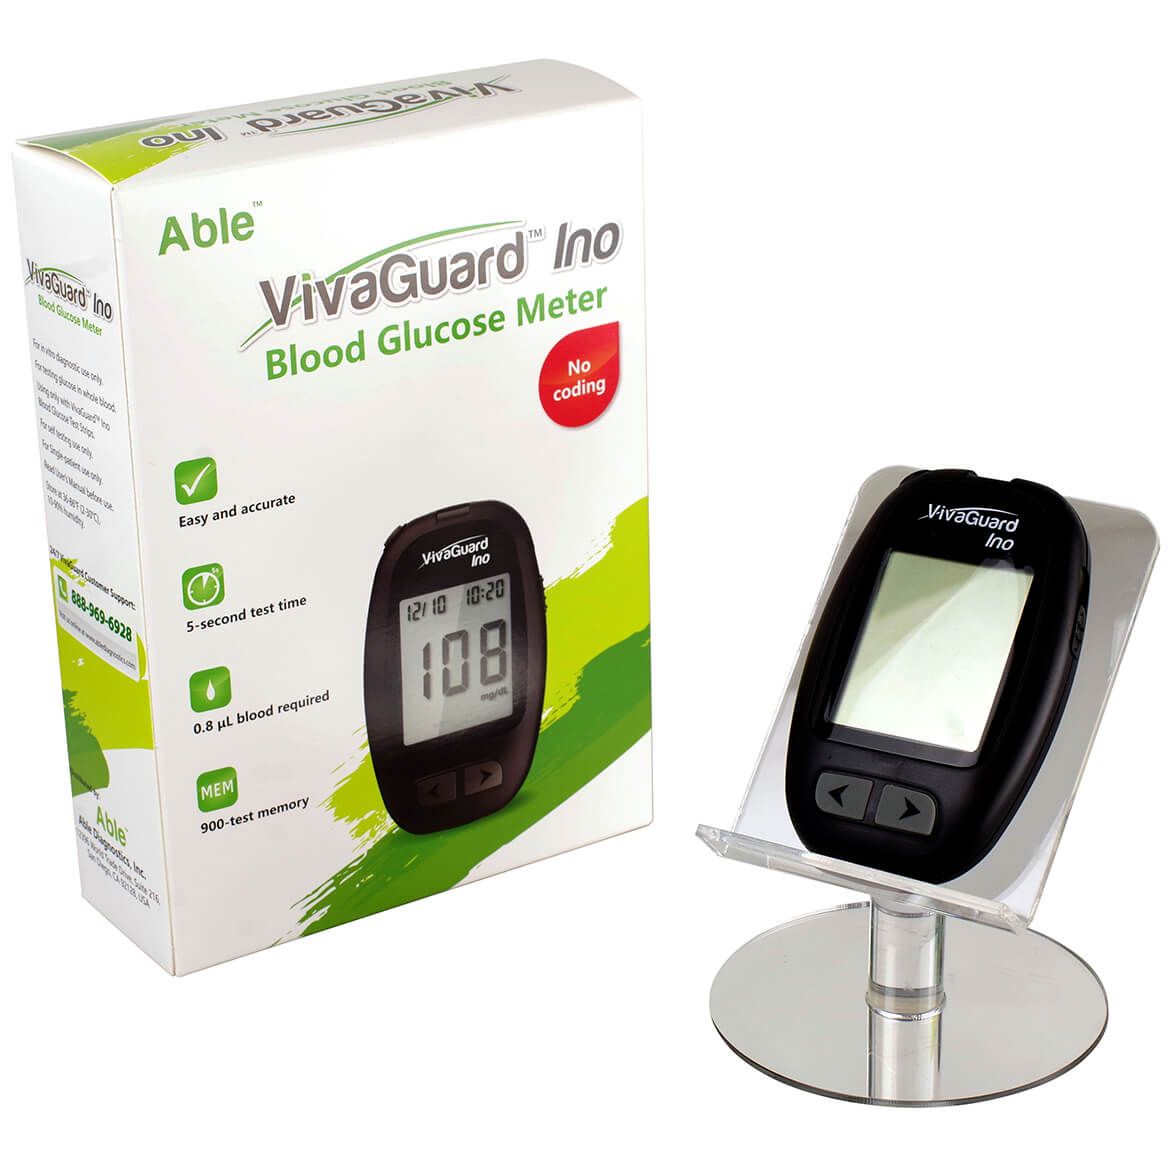 Able™ VivaGuard™ Ino Blood Glucose Meter with Strip Ejector + '-' + 373365